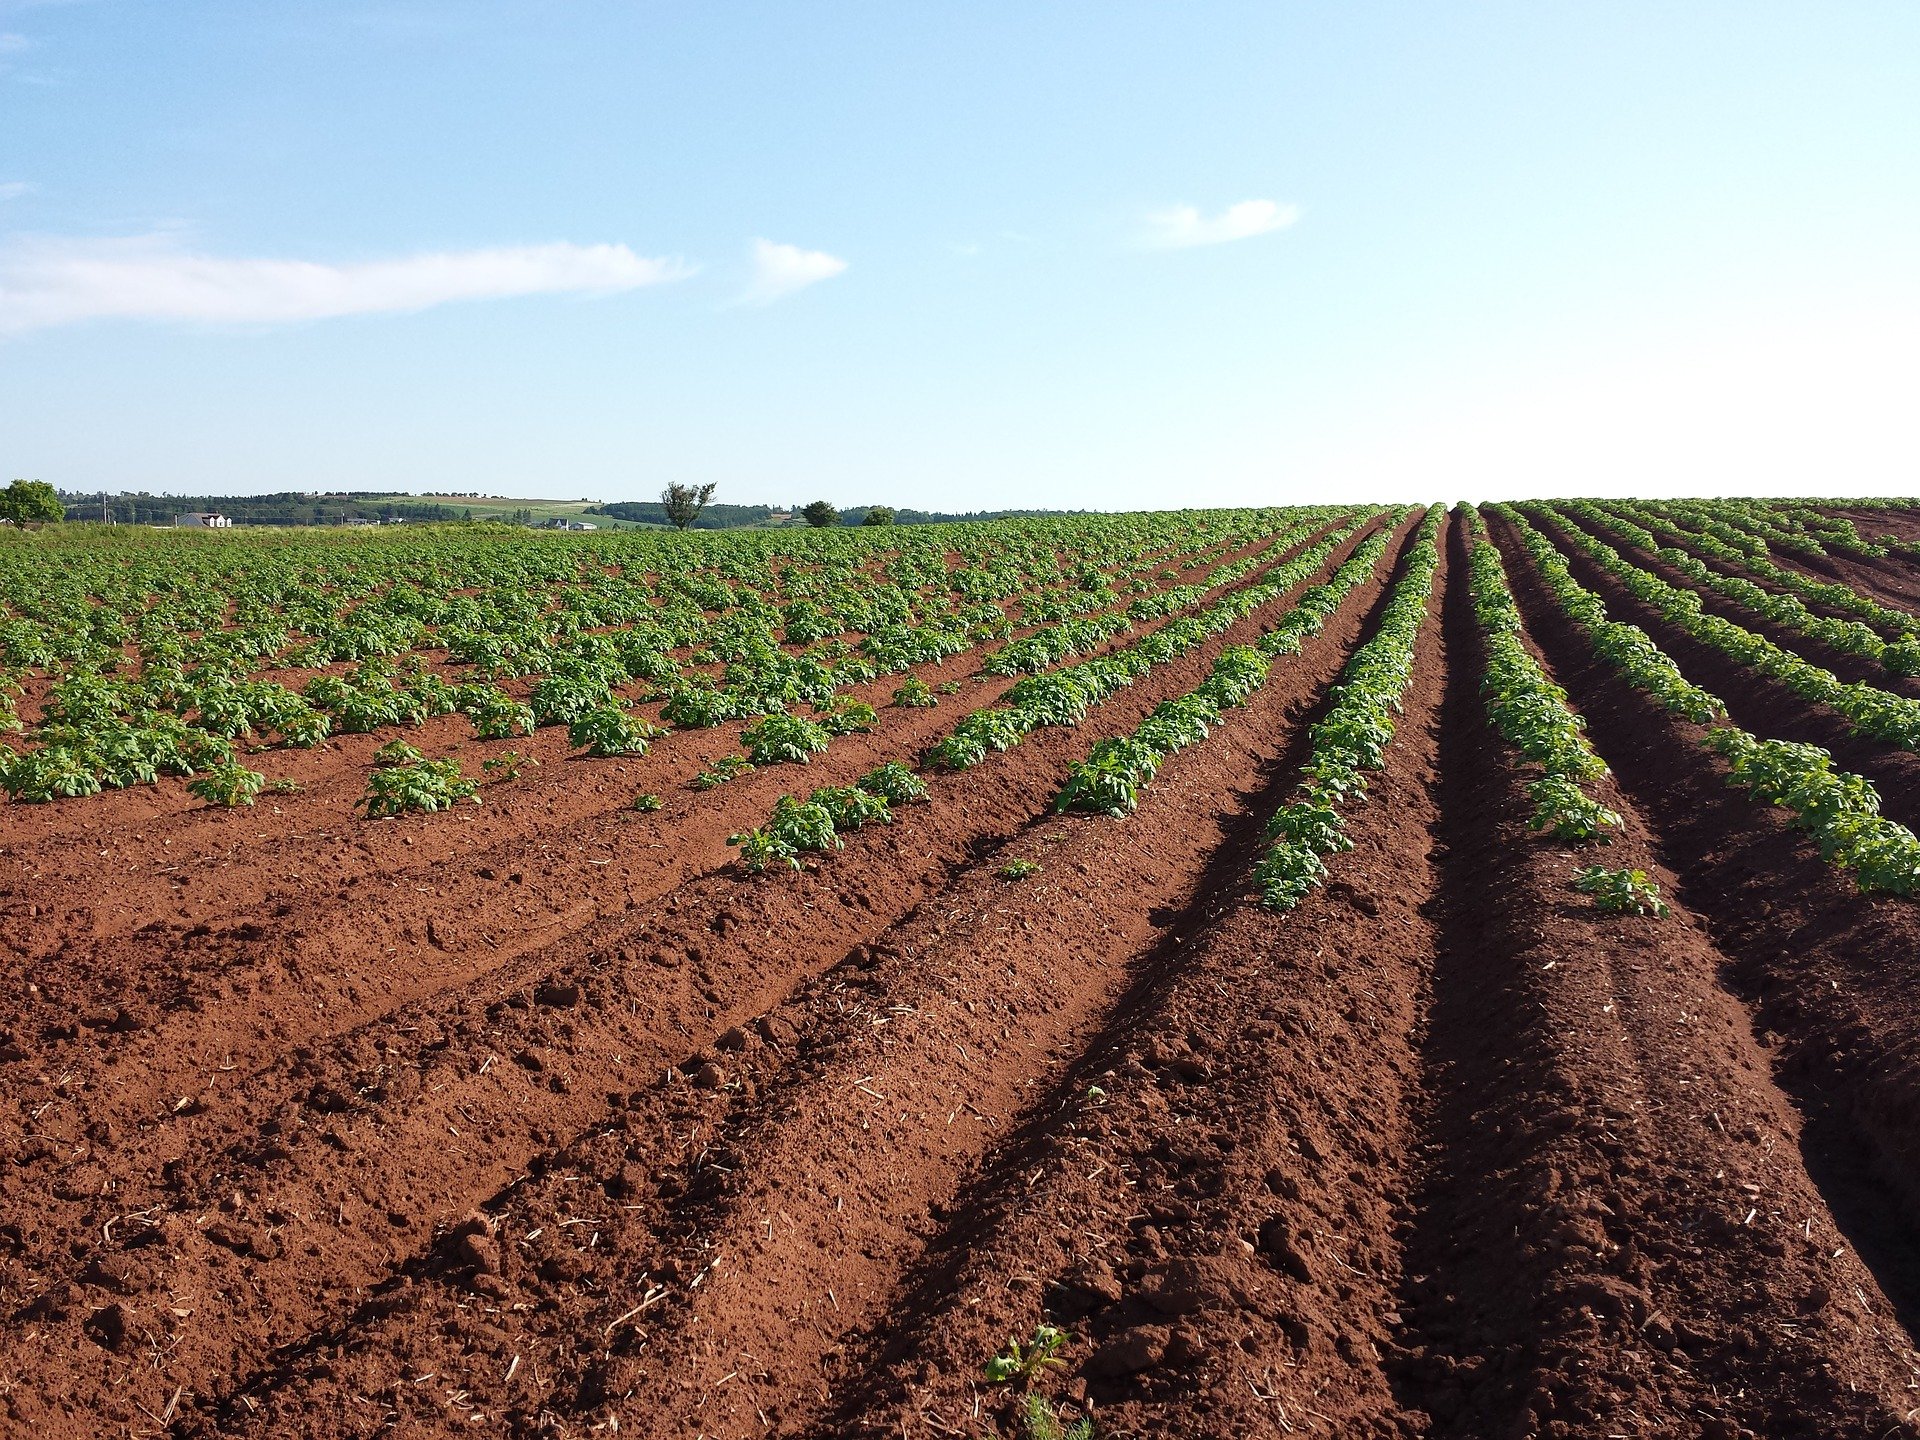 As more food than ever is being grown, it is important to find ways to promote and maintain soil quality.